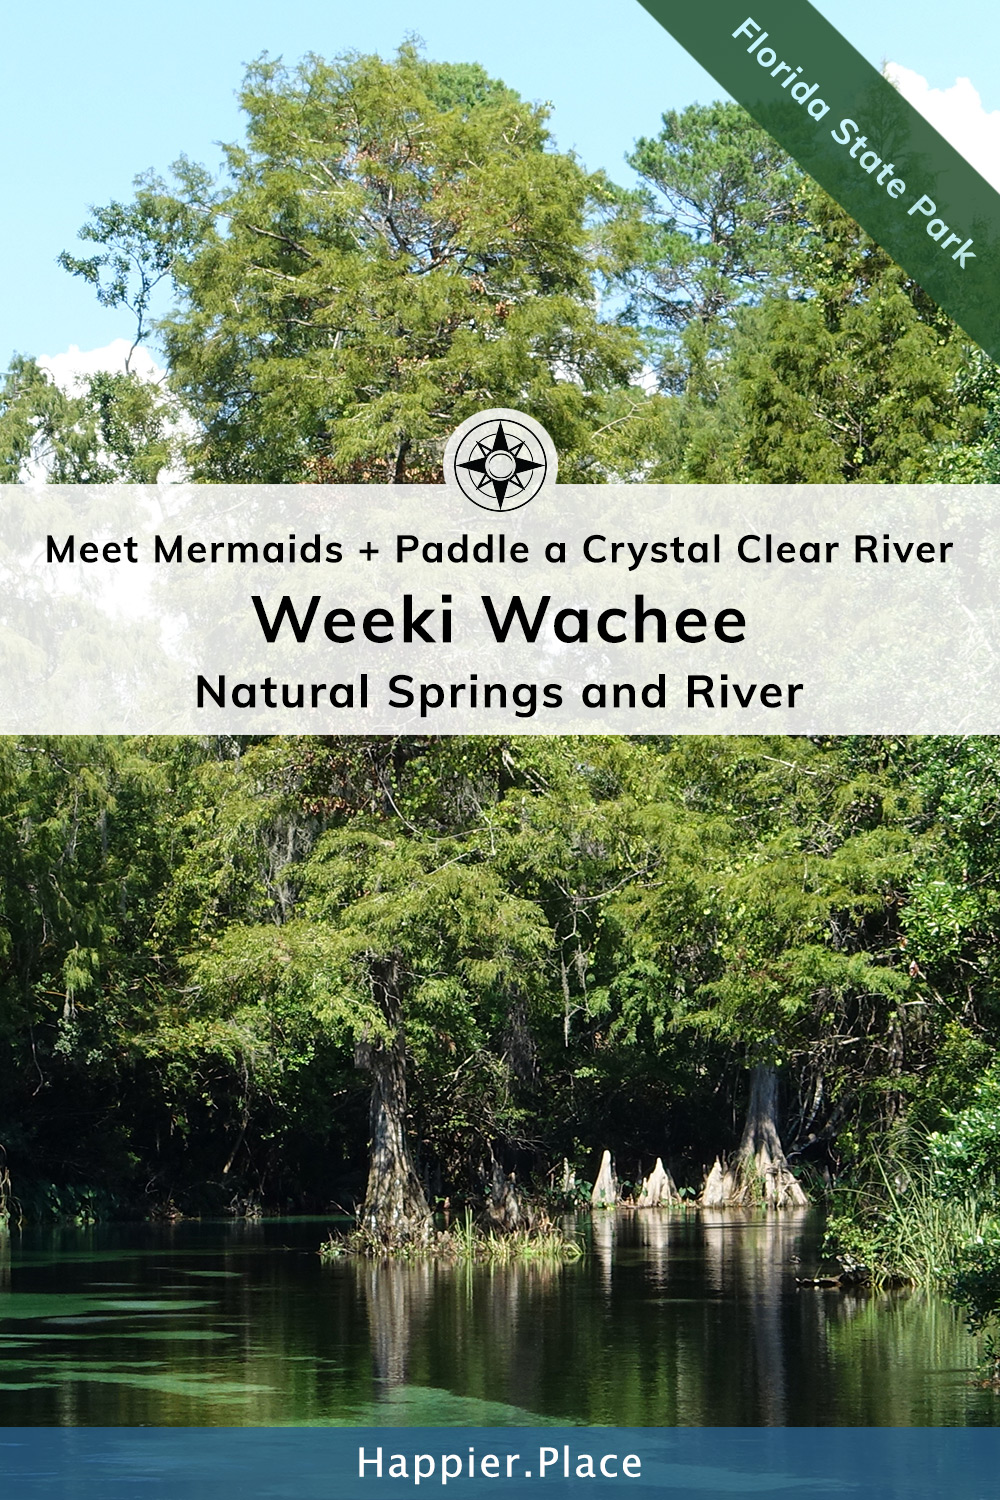 Weeki Wachee Springs and River in Florida - Meet Mermaids, swim in a natural spring and paddle the crystal clear river.